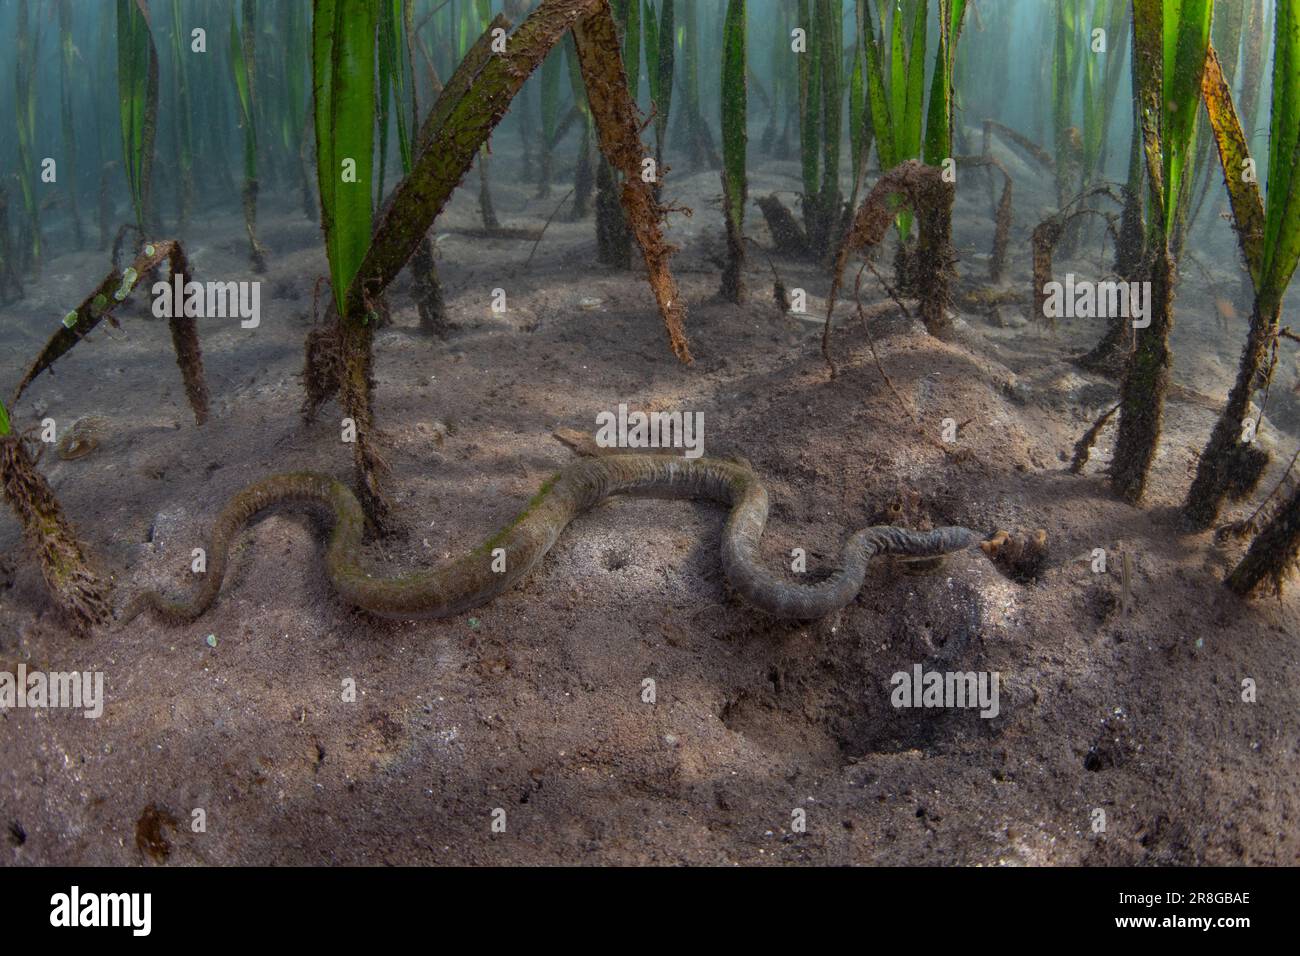 A marine file snake, Acrochordus granulatus, slithers across the muddy seafloor in an Indonesian seagrass bed. The species is completely aquatic. Stock Photo